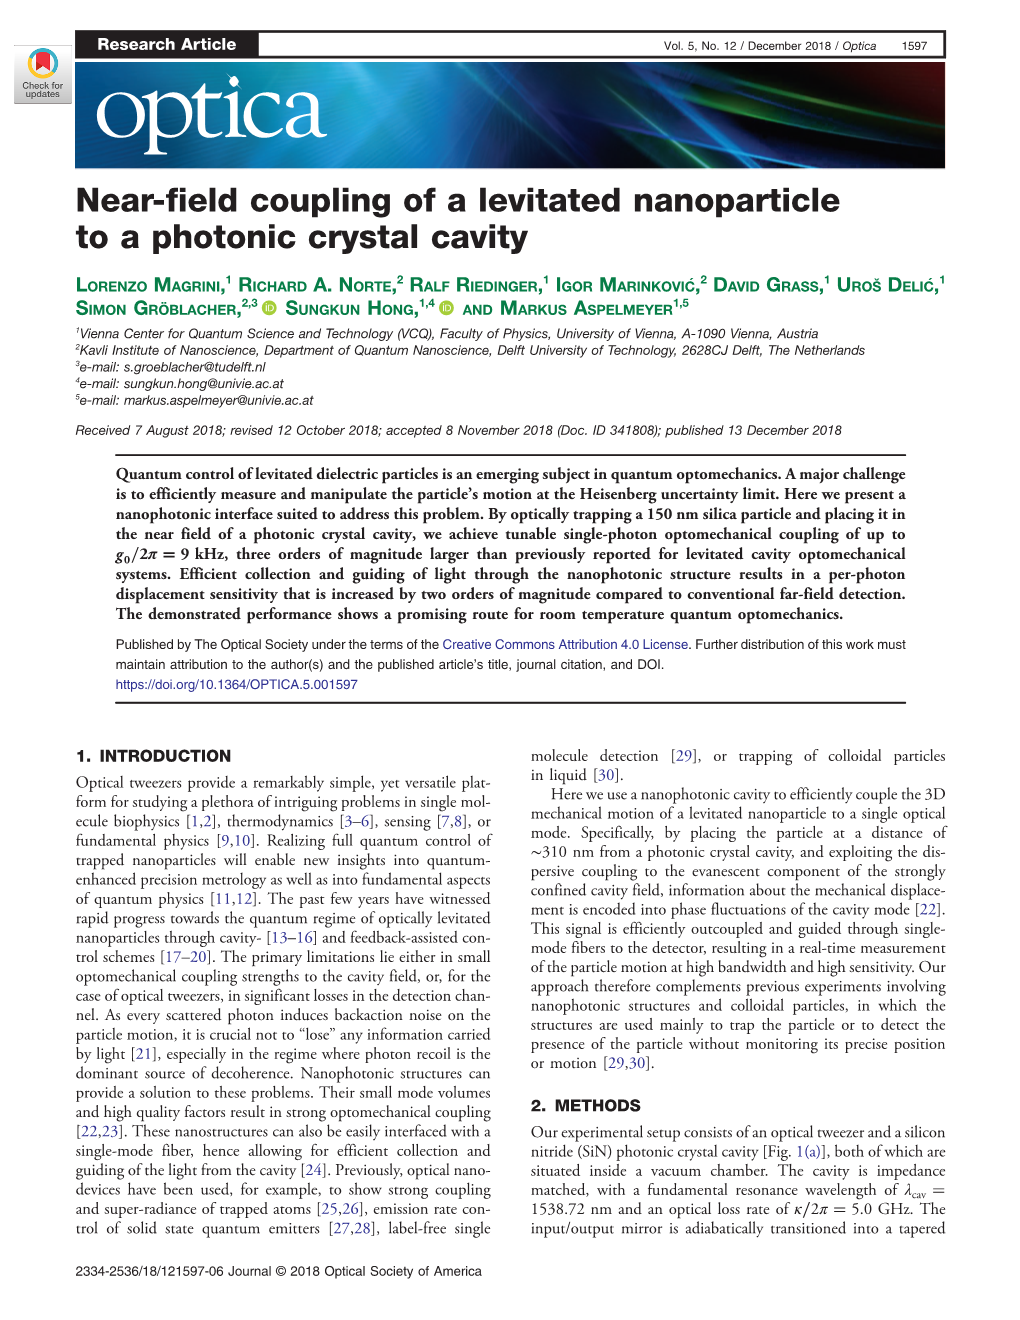 Near-Field Coupling of a Levitated Nanoparticle to a Photonic Crystal Cavity